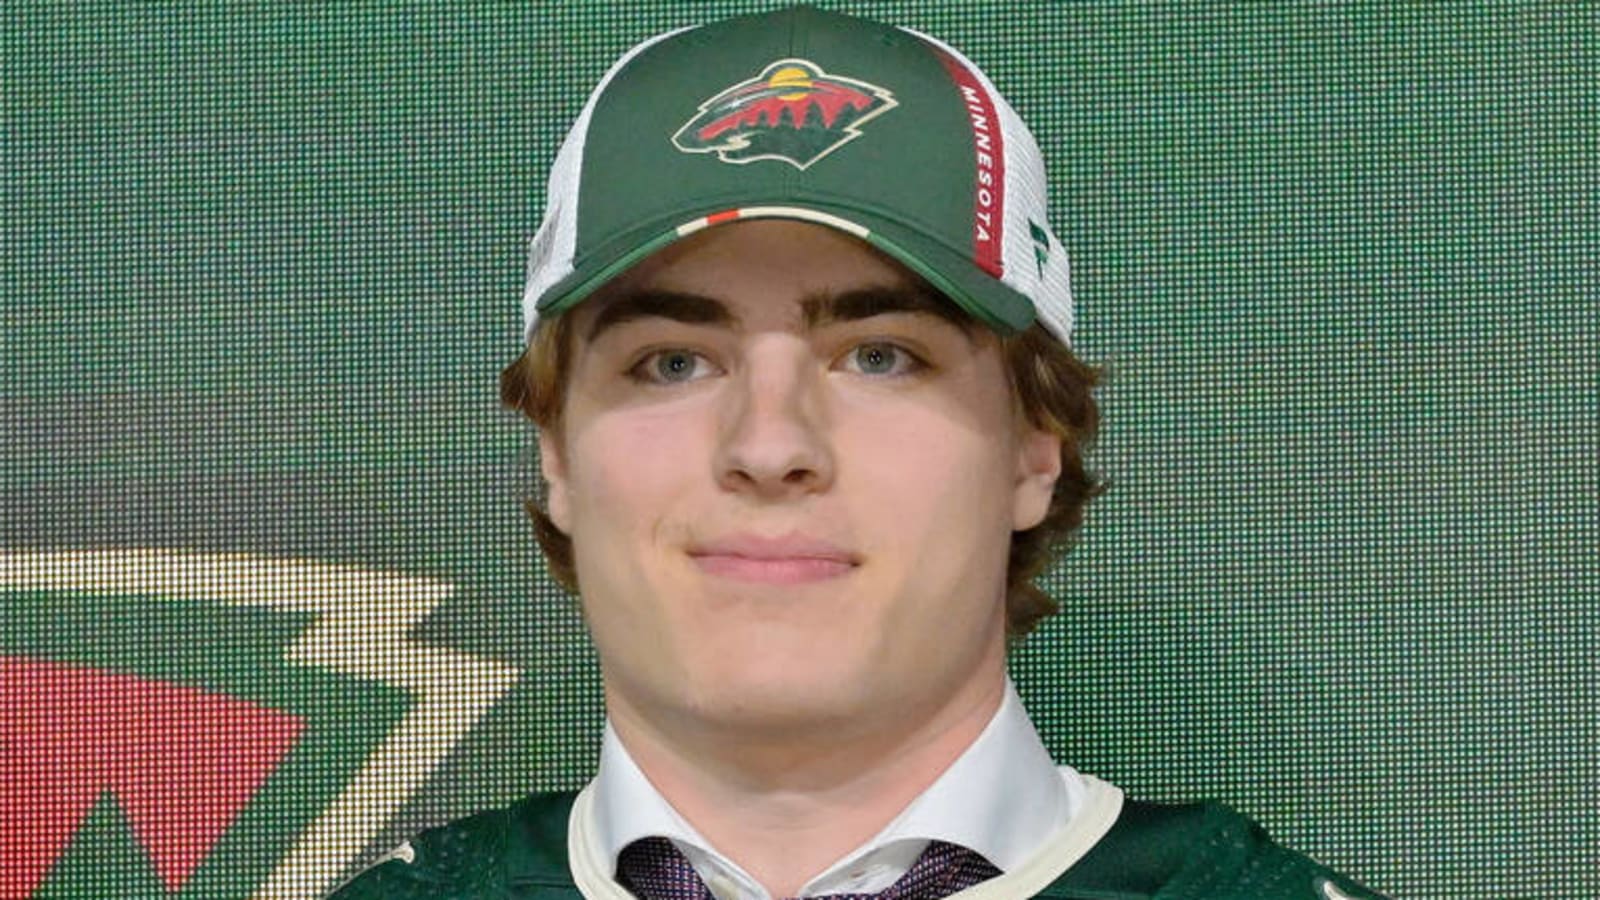 Top Wild prospect arrives from Sweden, will finish year in AHL